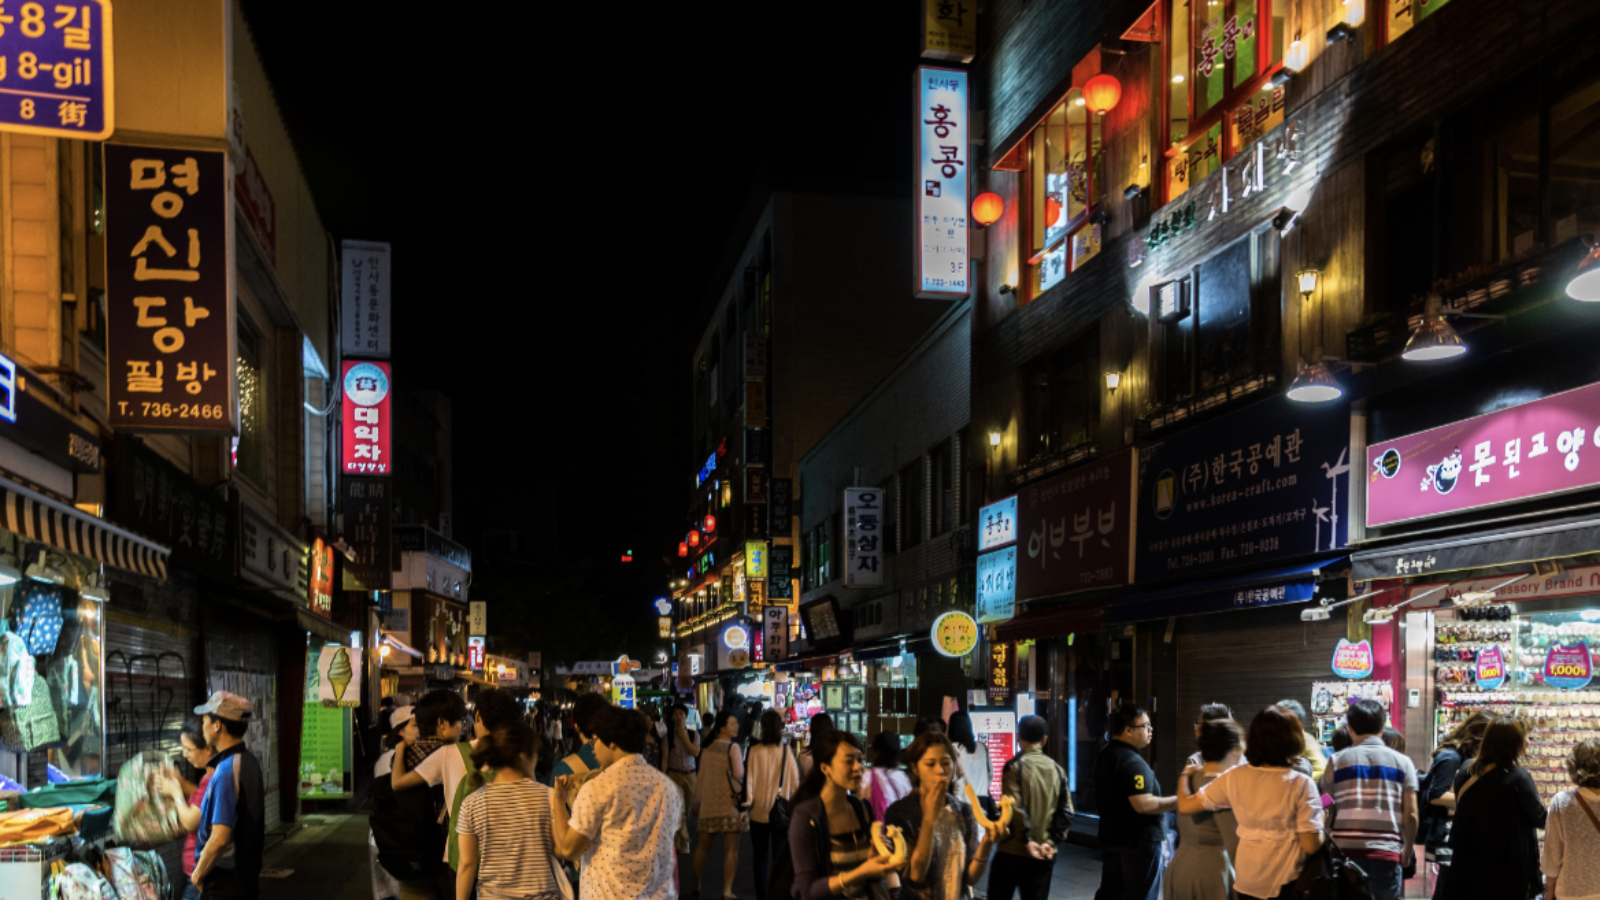 A busy city street at night in South Korea.